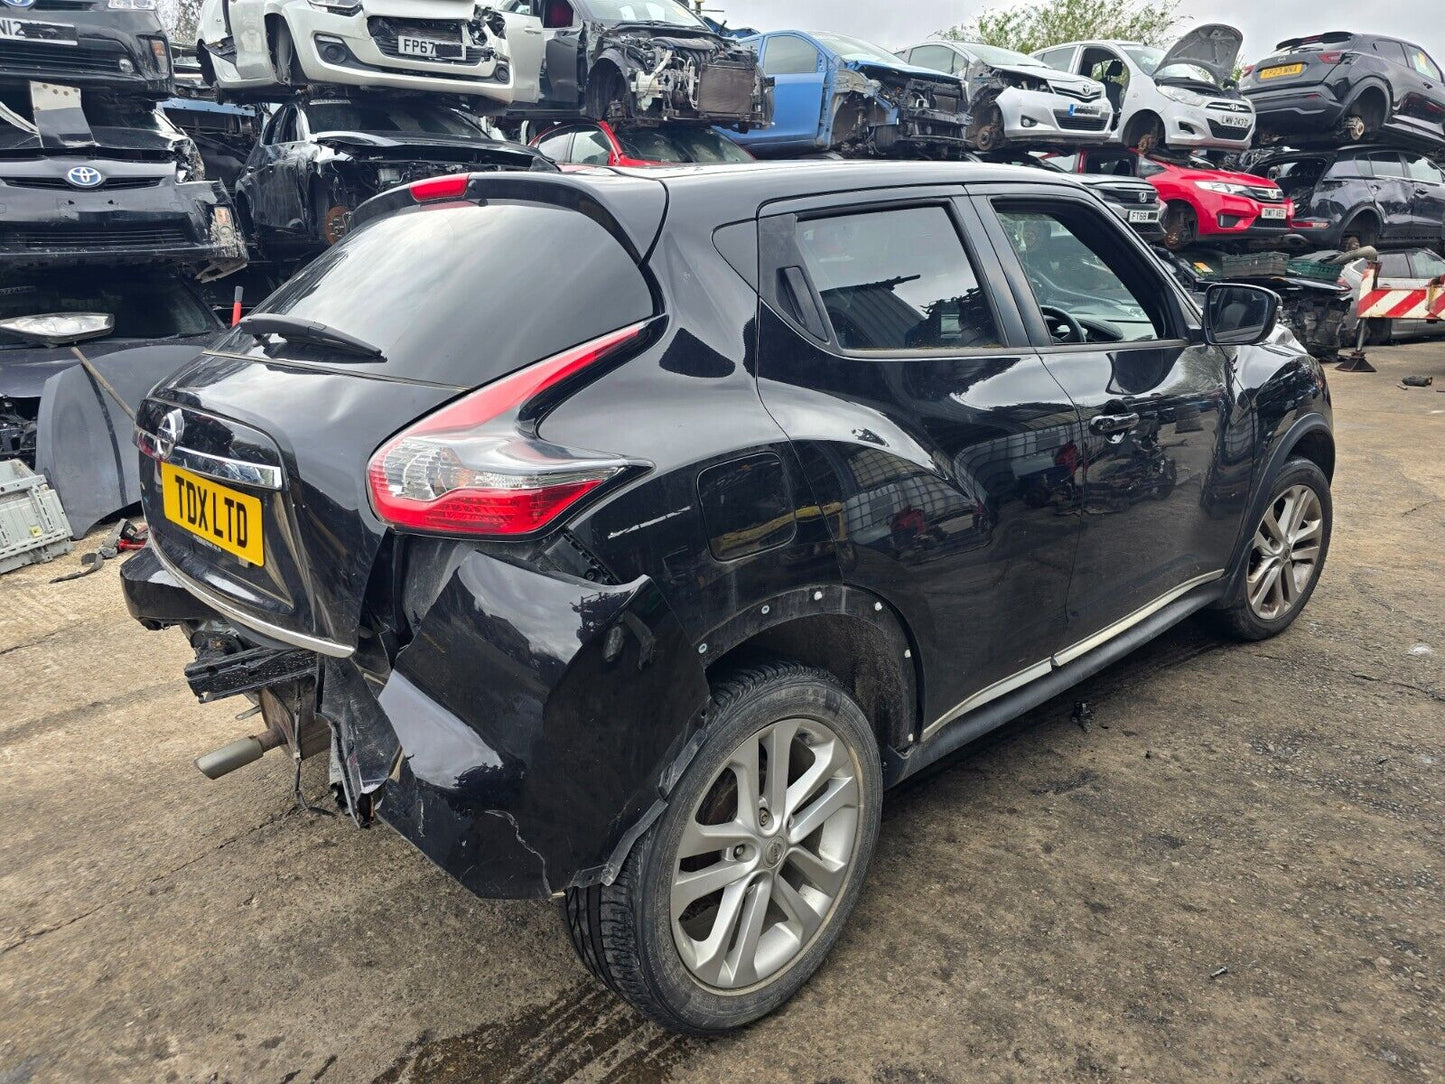 2016 NISSAN JUKE F15 N-CONNECTA 1.2 DIG-T PETROL MANUAL FOR PARTS & SPARES